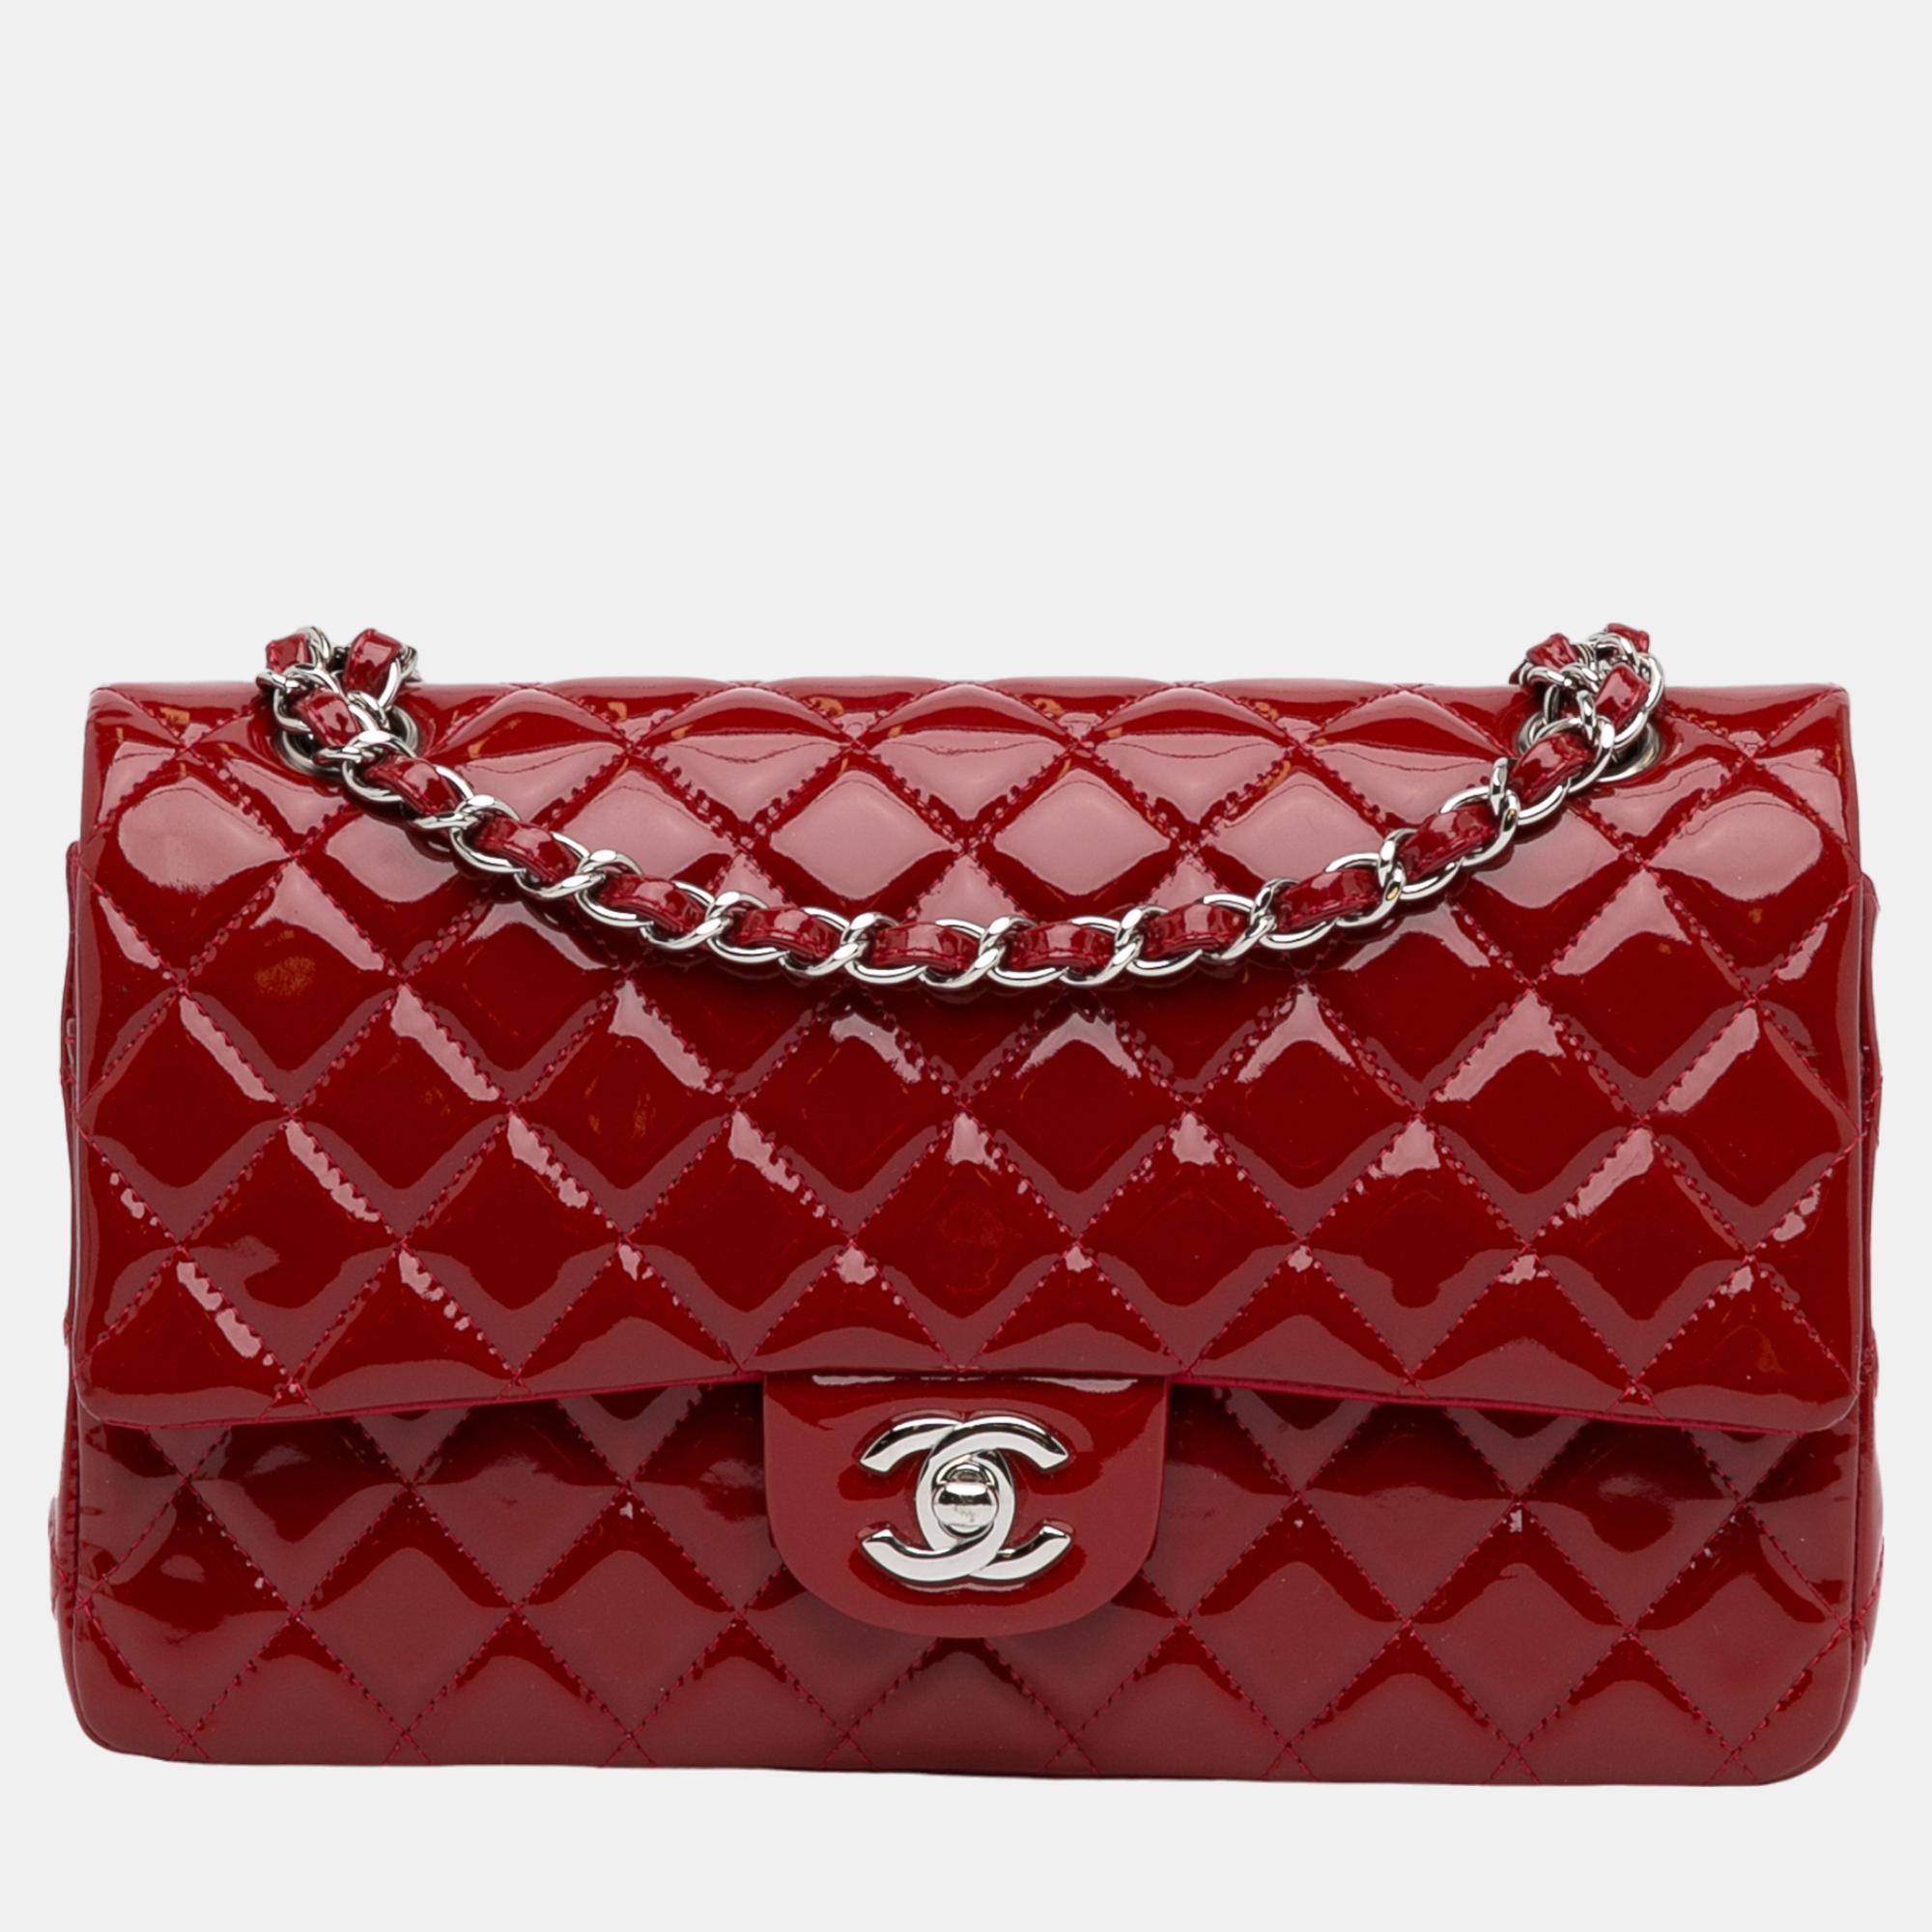 Chanel red medium classic patent double flap